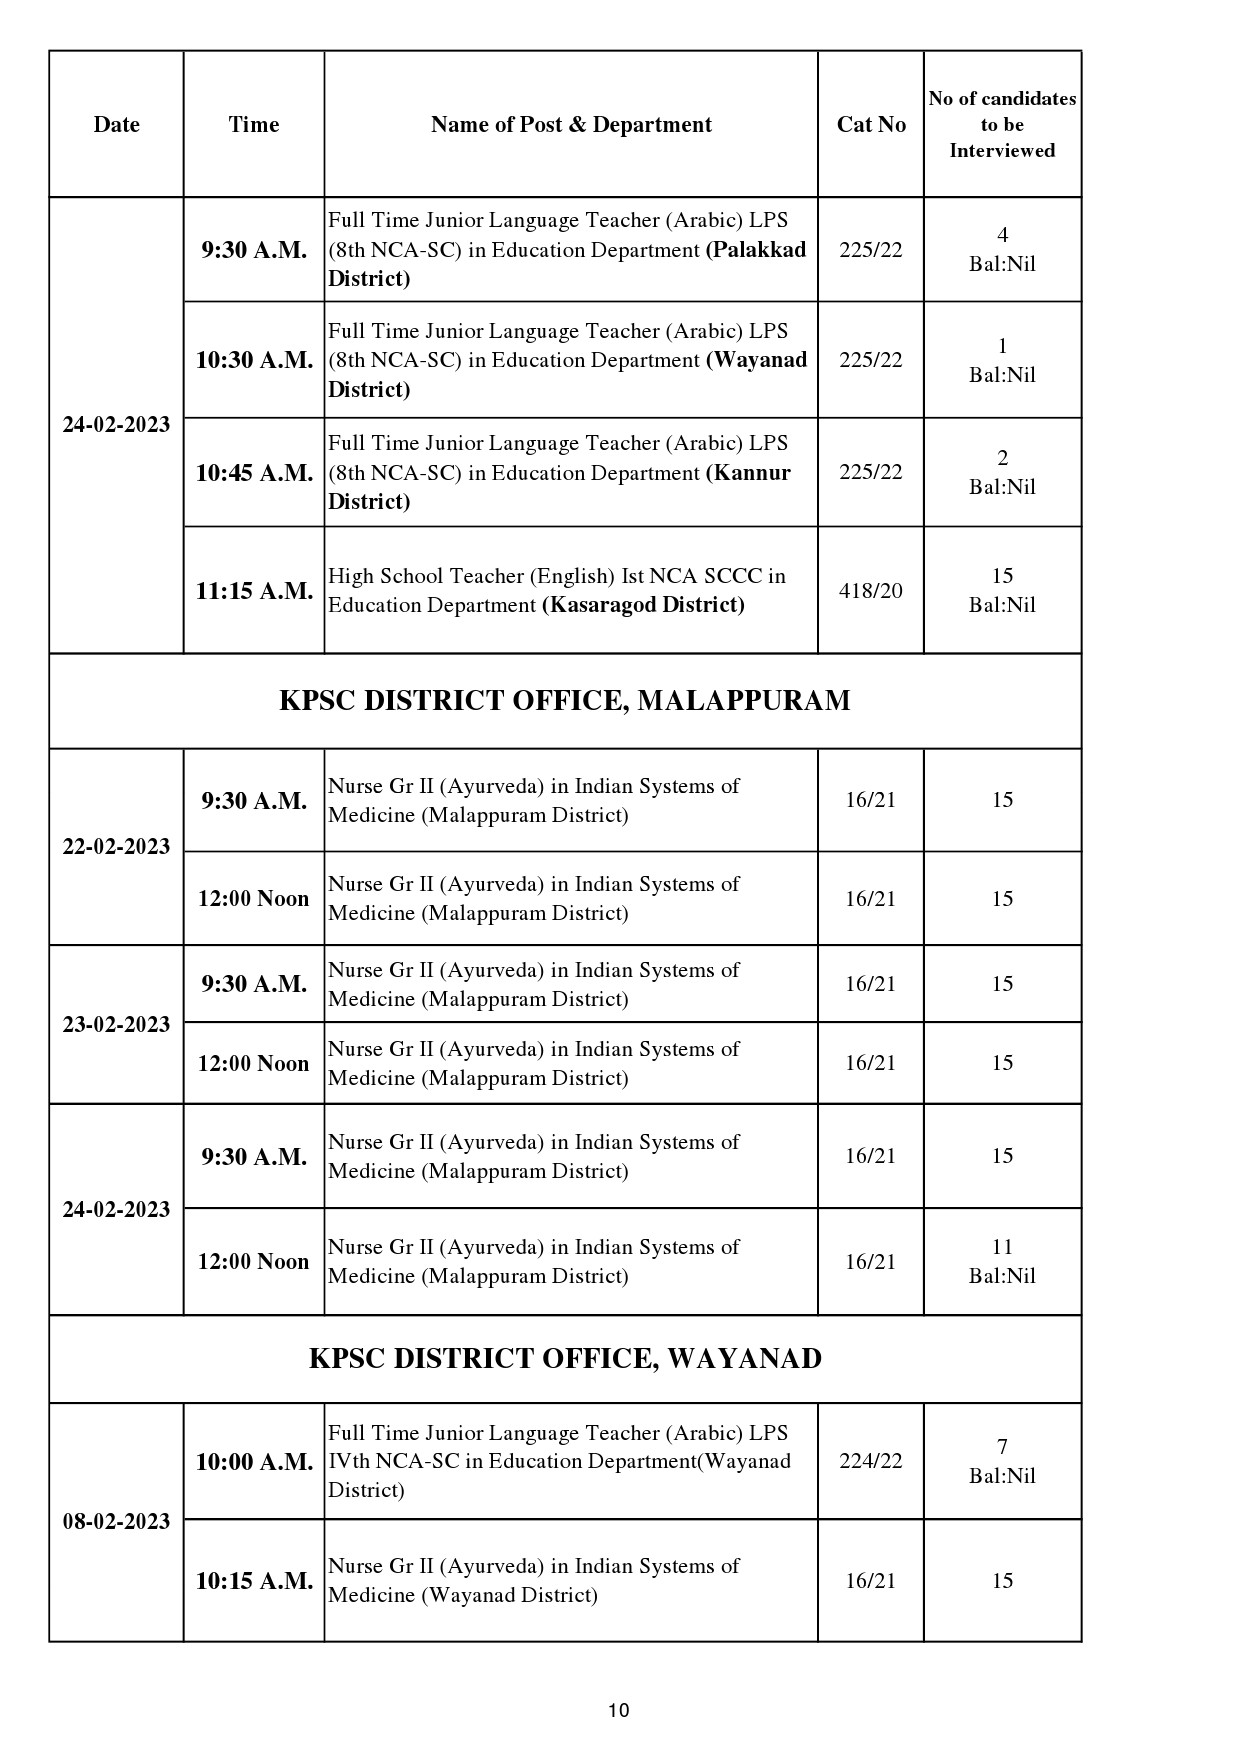 KPSC Interview Programme For The Month Of February 2023 - Notification Image 10